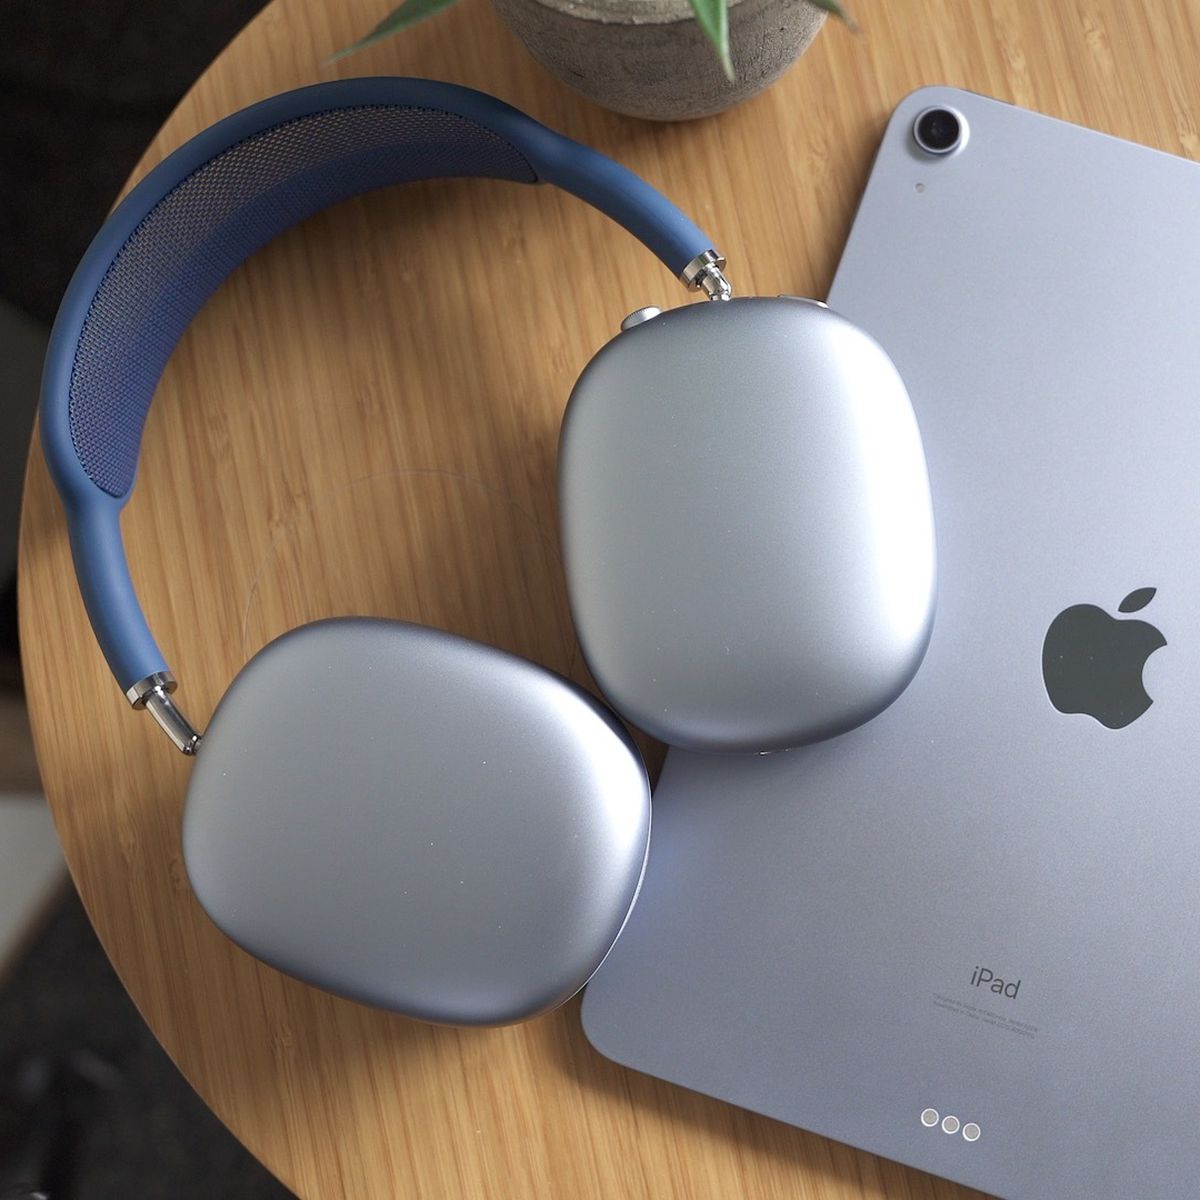 AirPods Max: Should You Buy? Everything We Know